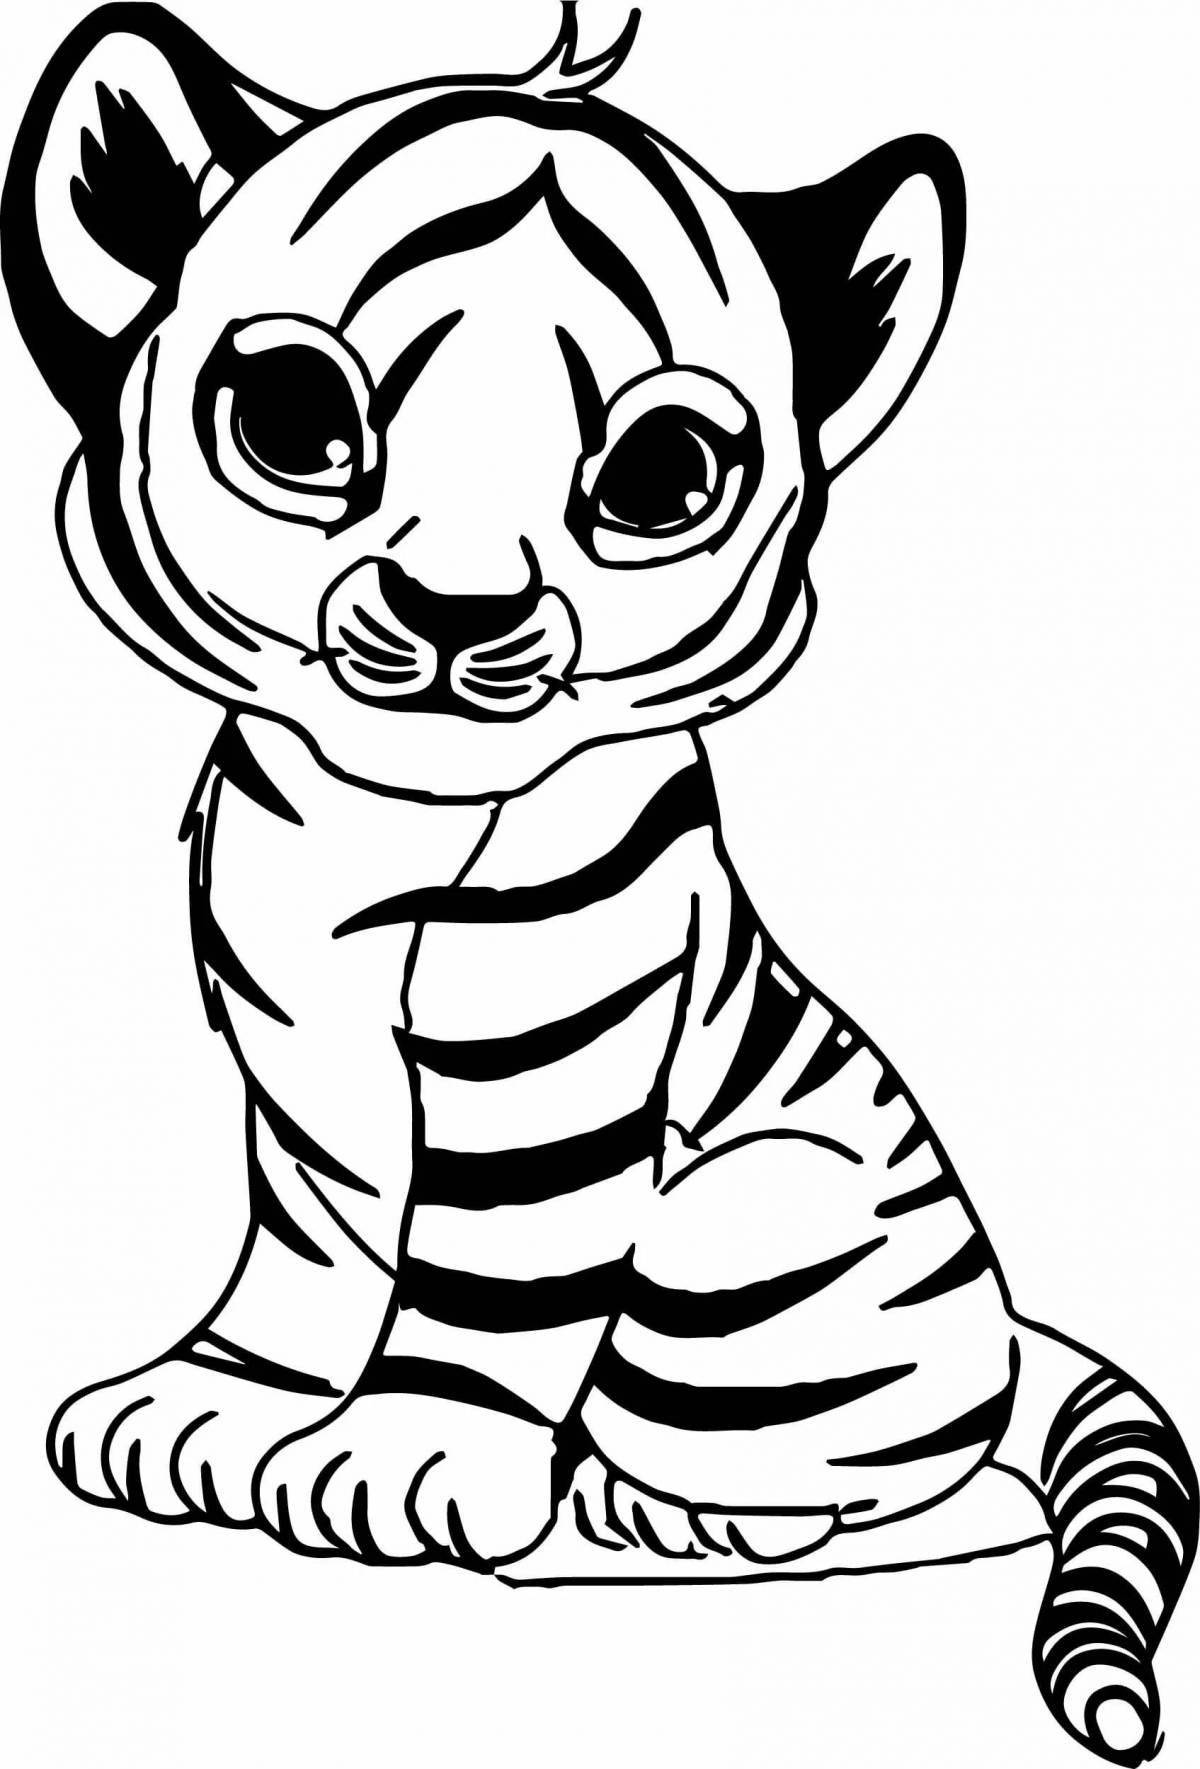 Exciting tiger drawing for kids